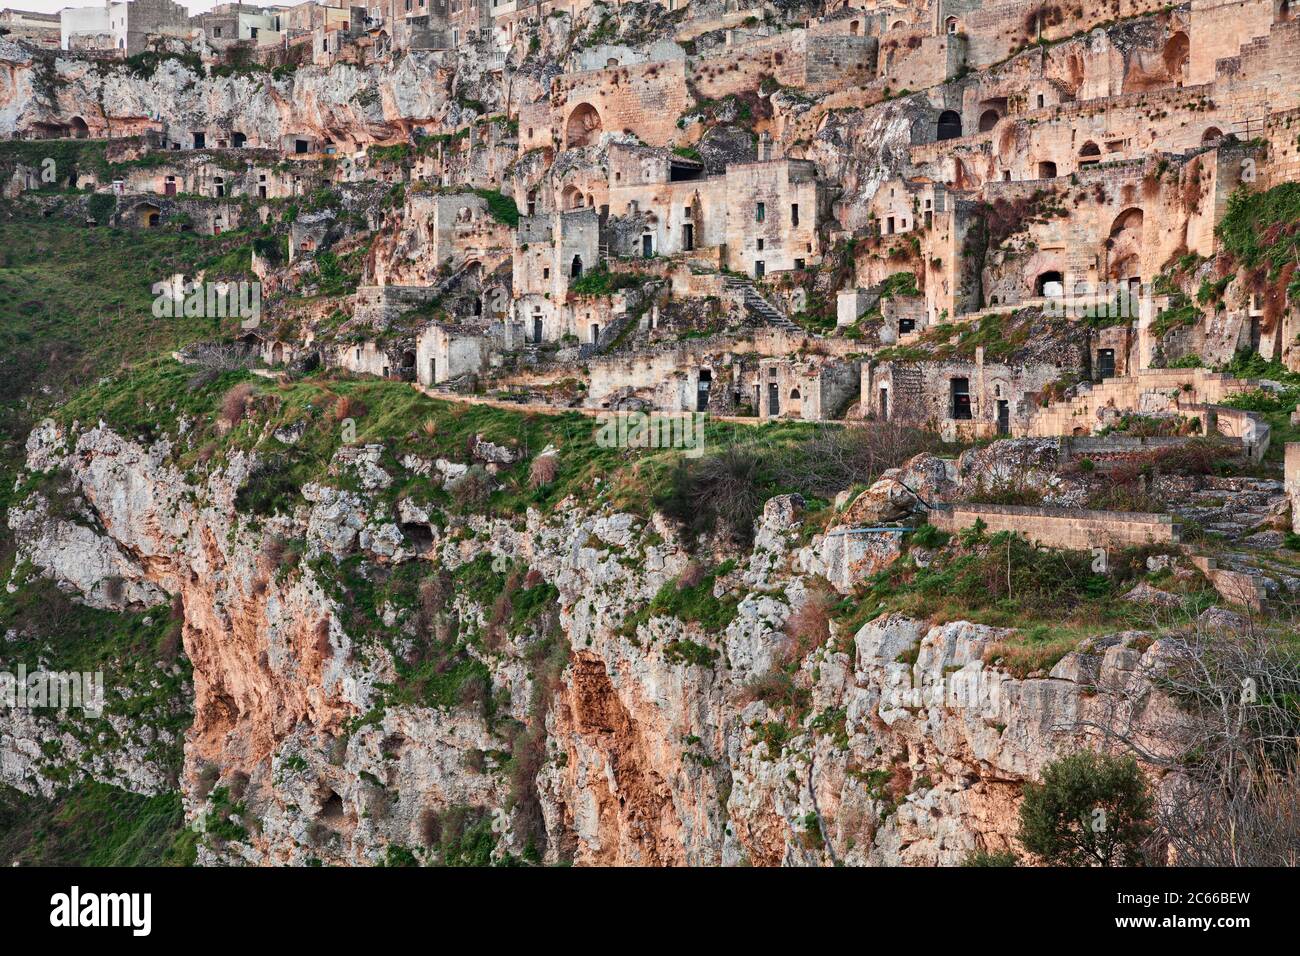 Matera, Basilicata, Italy: landscape of the old town called Sassi with the ancient cave houses carved into the tufa rock over the deep ravine Stock Photo